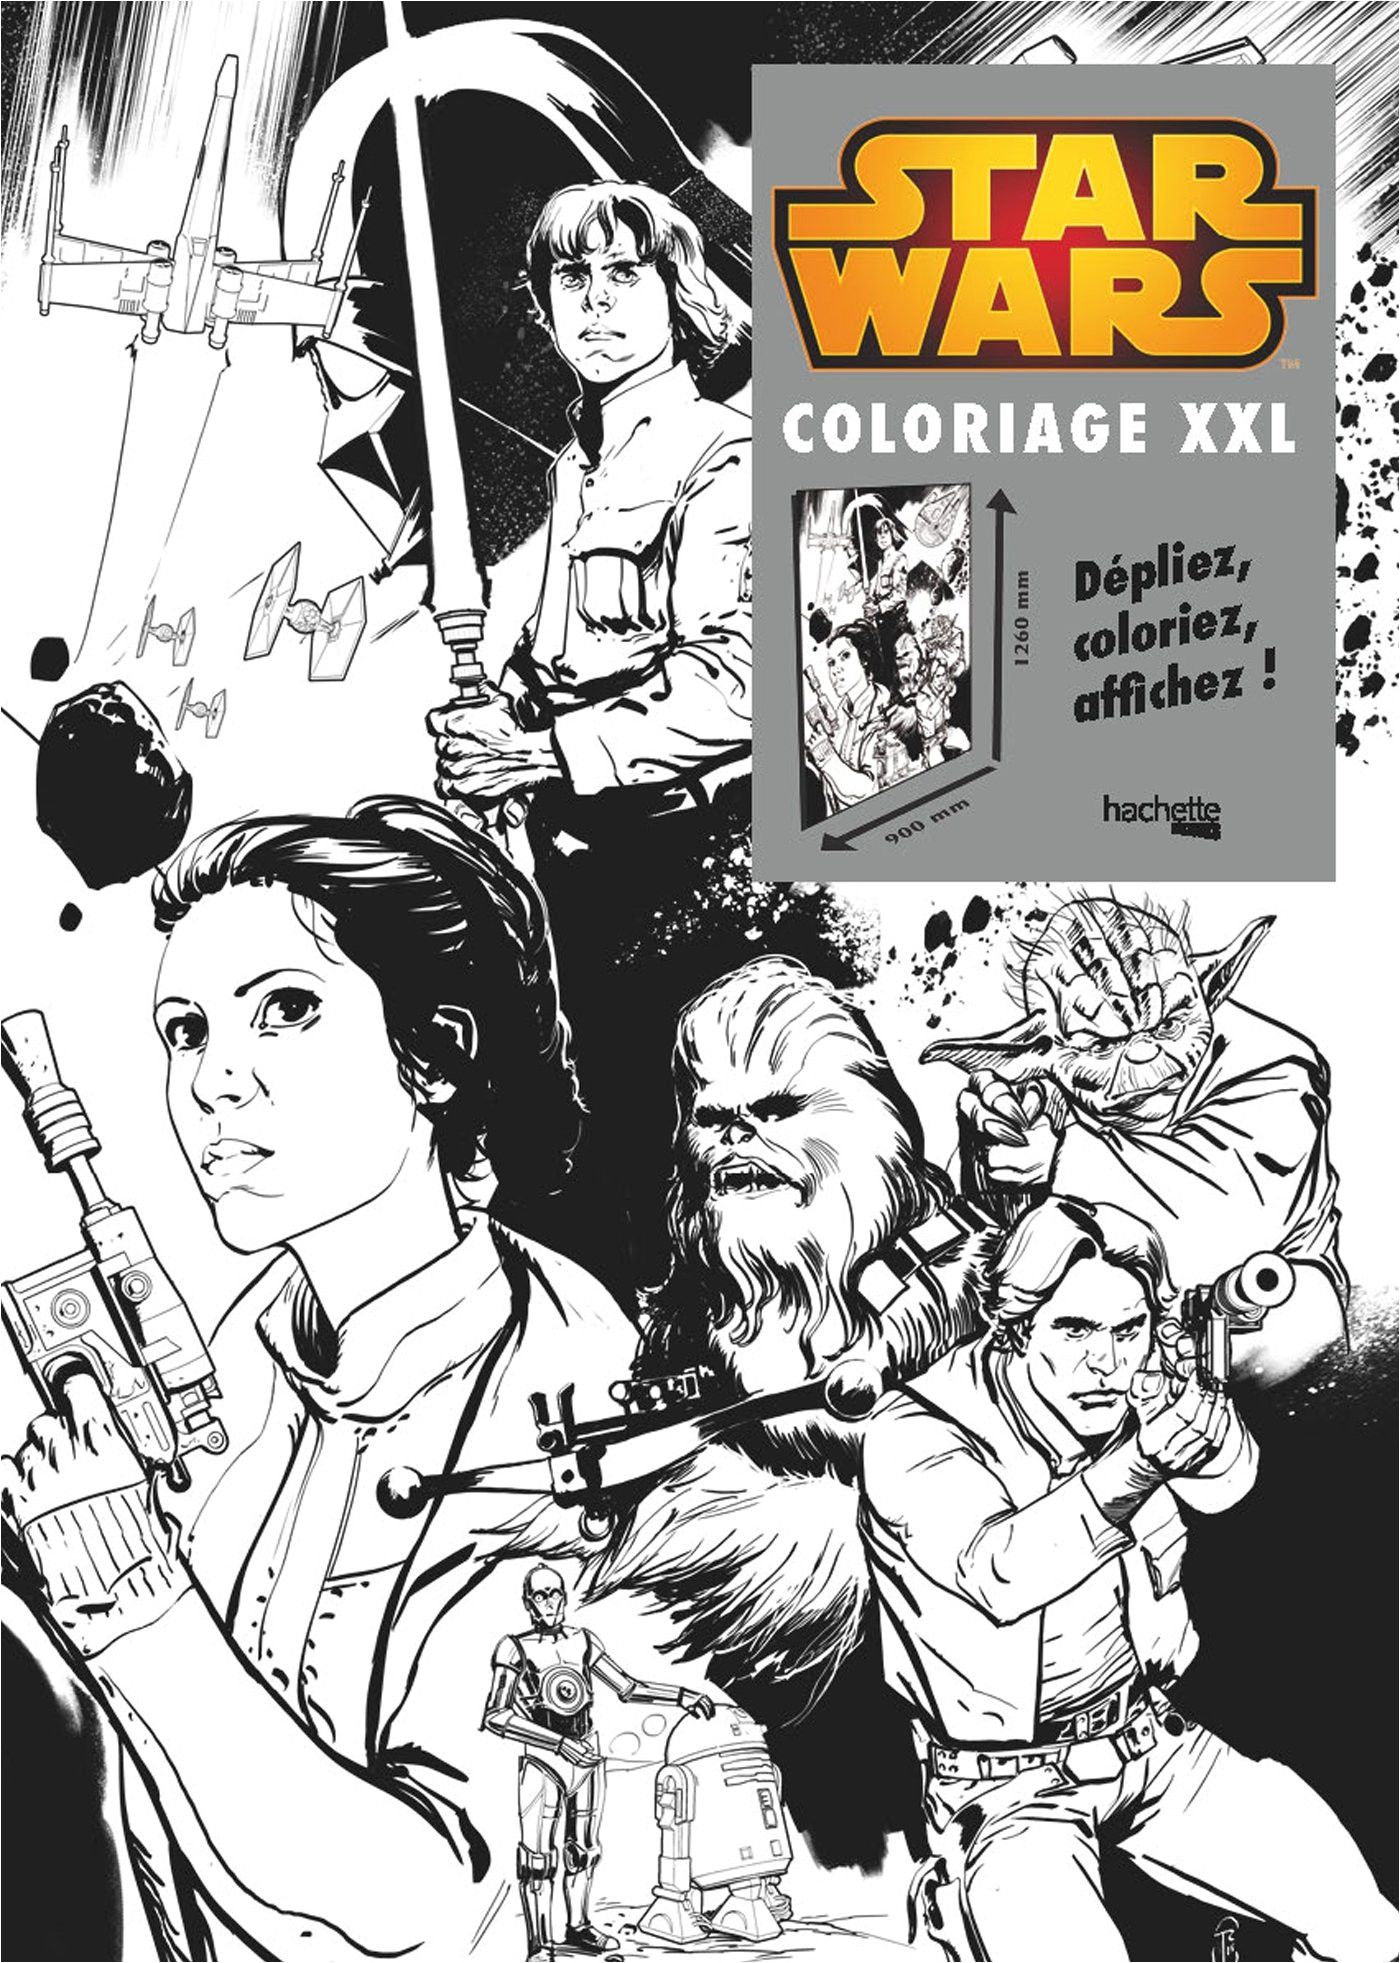 rey star wars vii les ateliers star wars coloriages mysteres